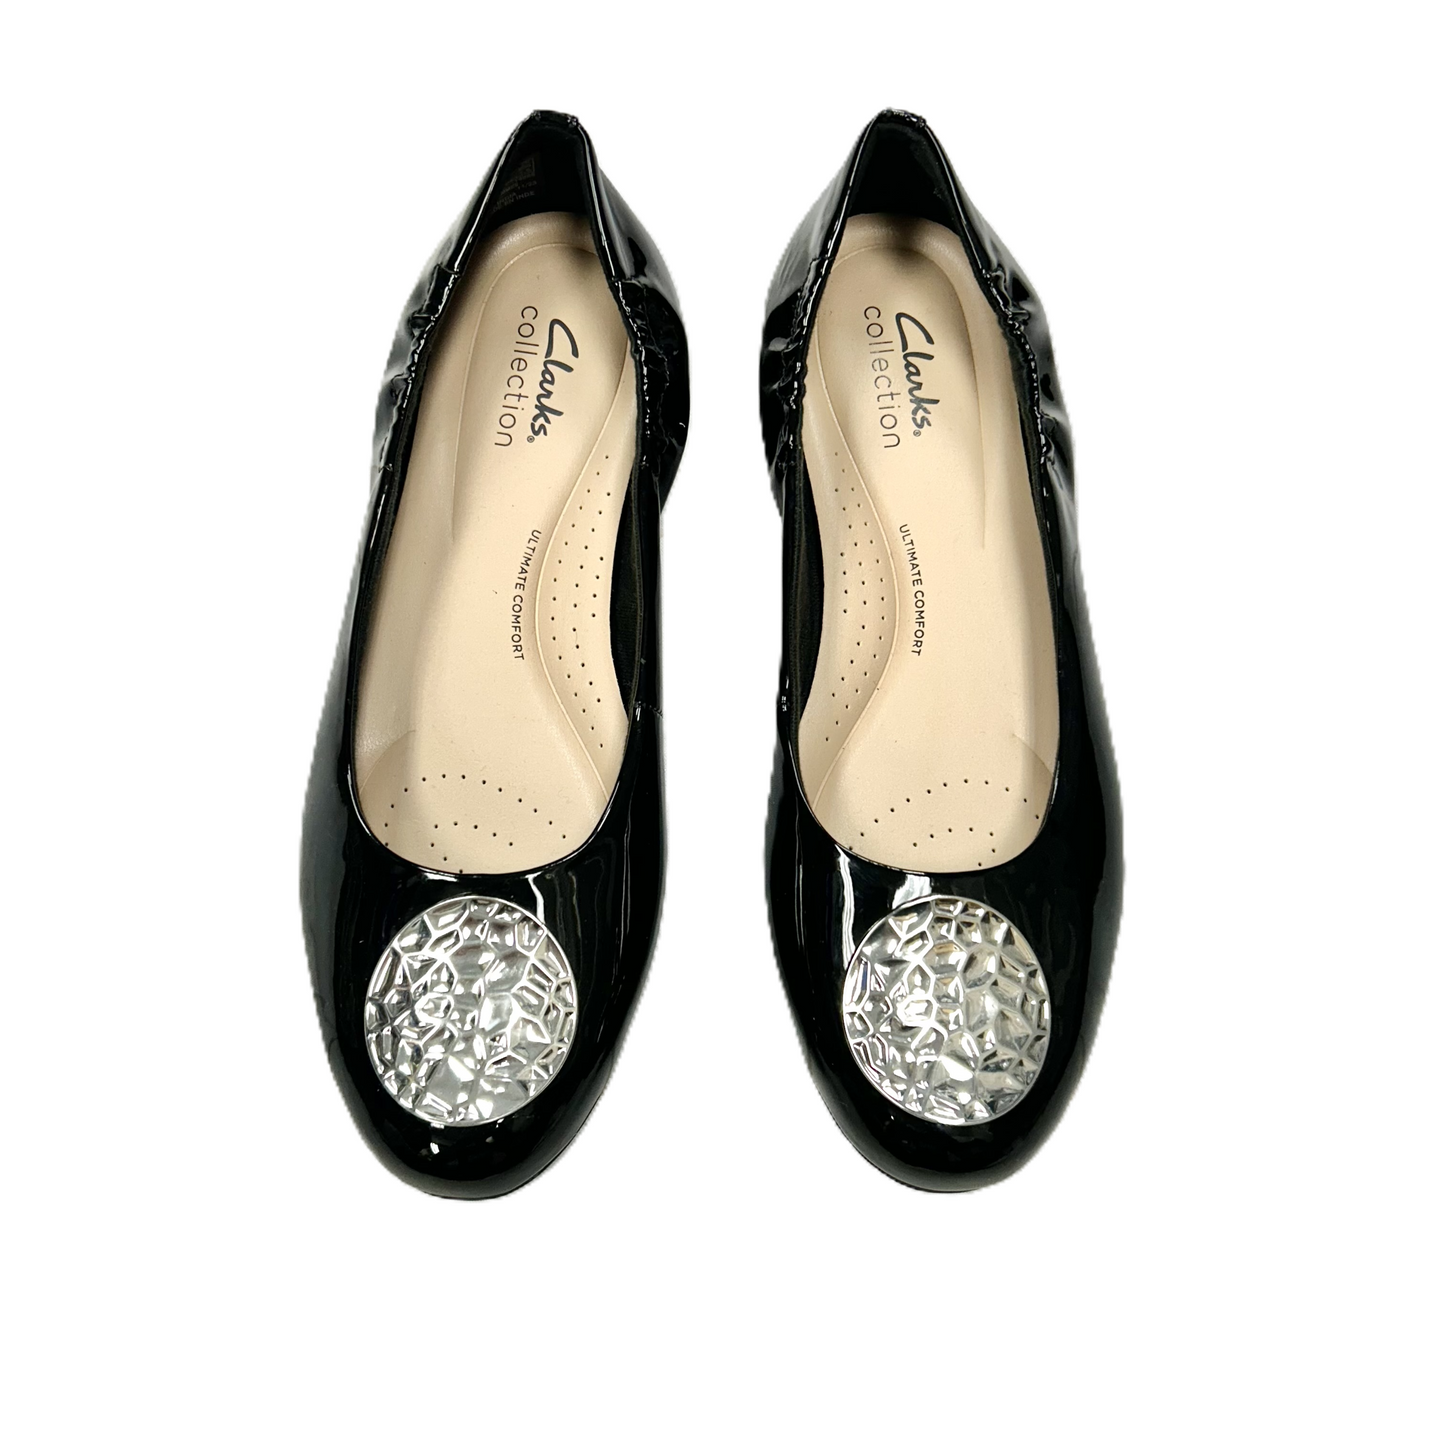 Black & Silver Shoes Flats By Clarks, Size: 7